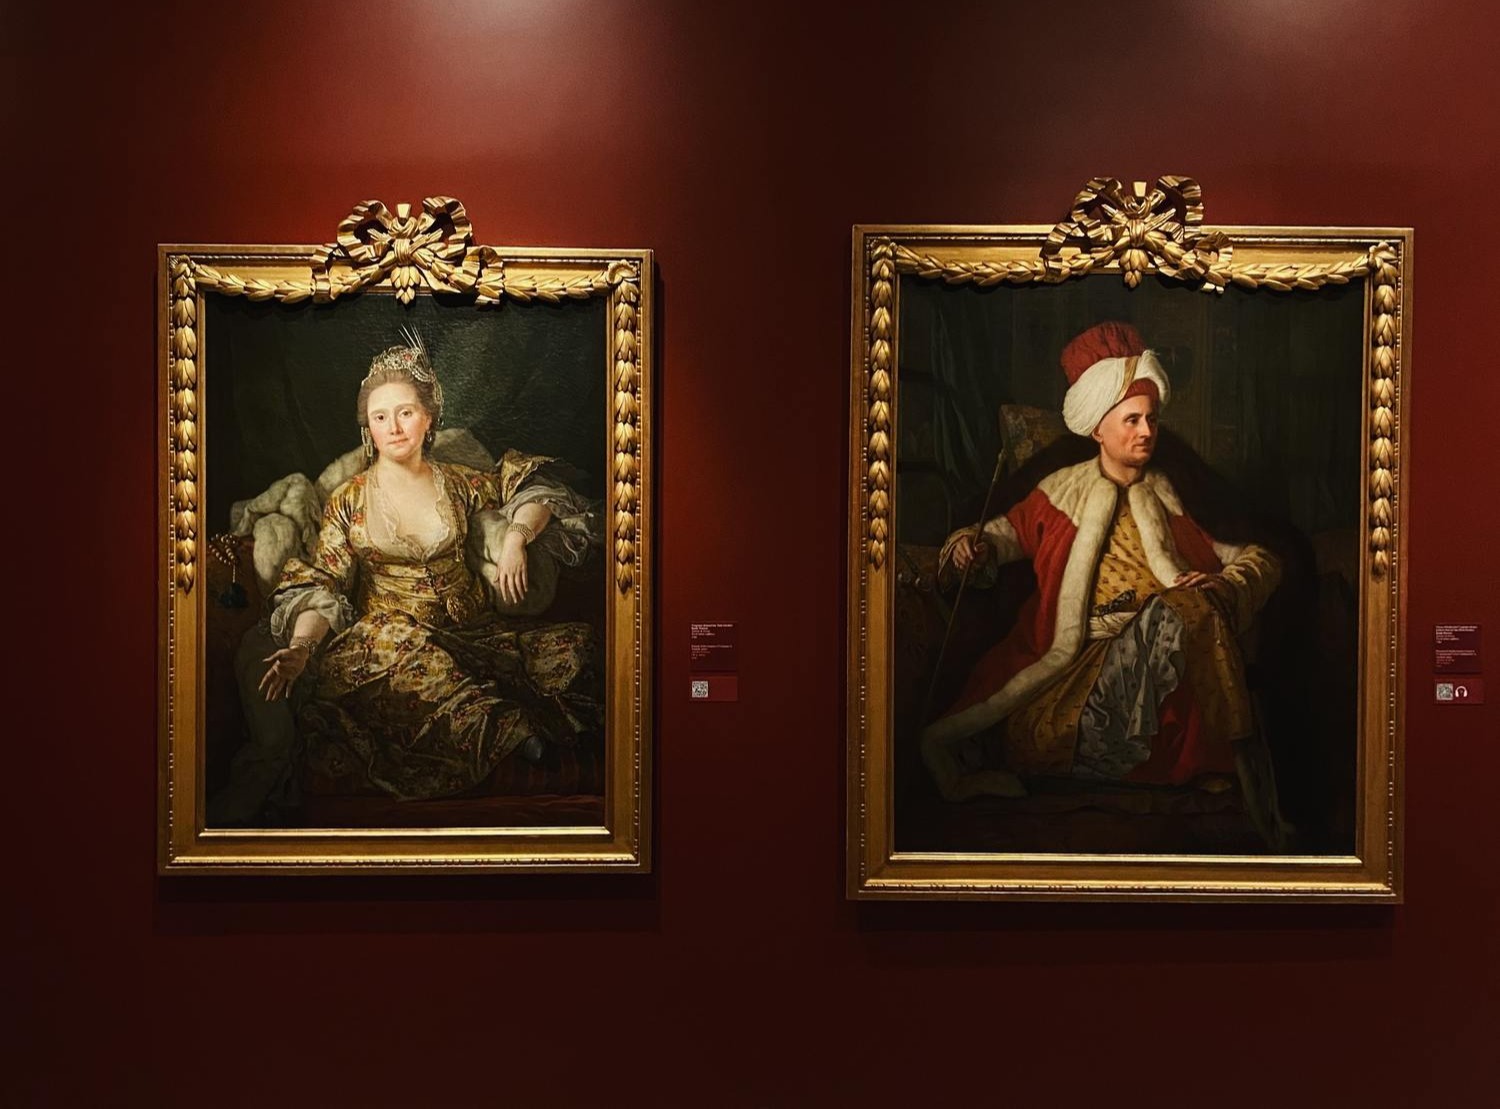 Two historical ottoman era pictures inside of the pera museum